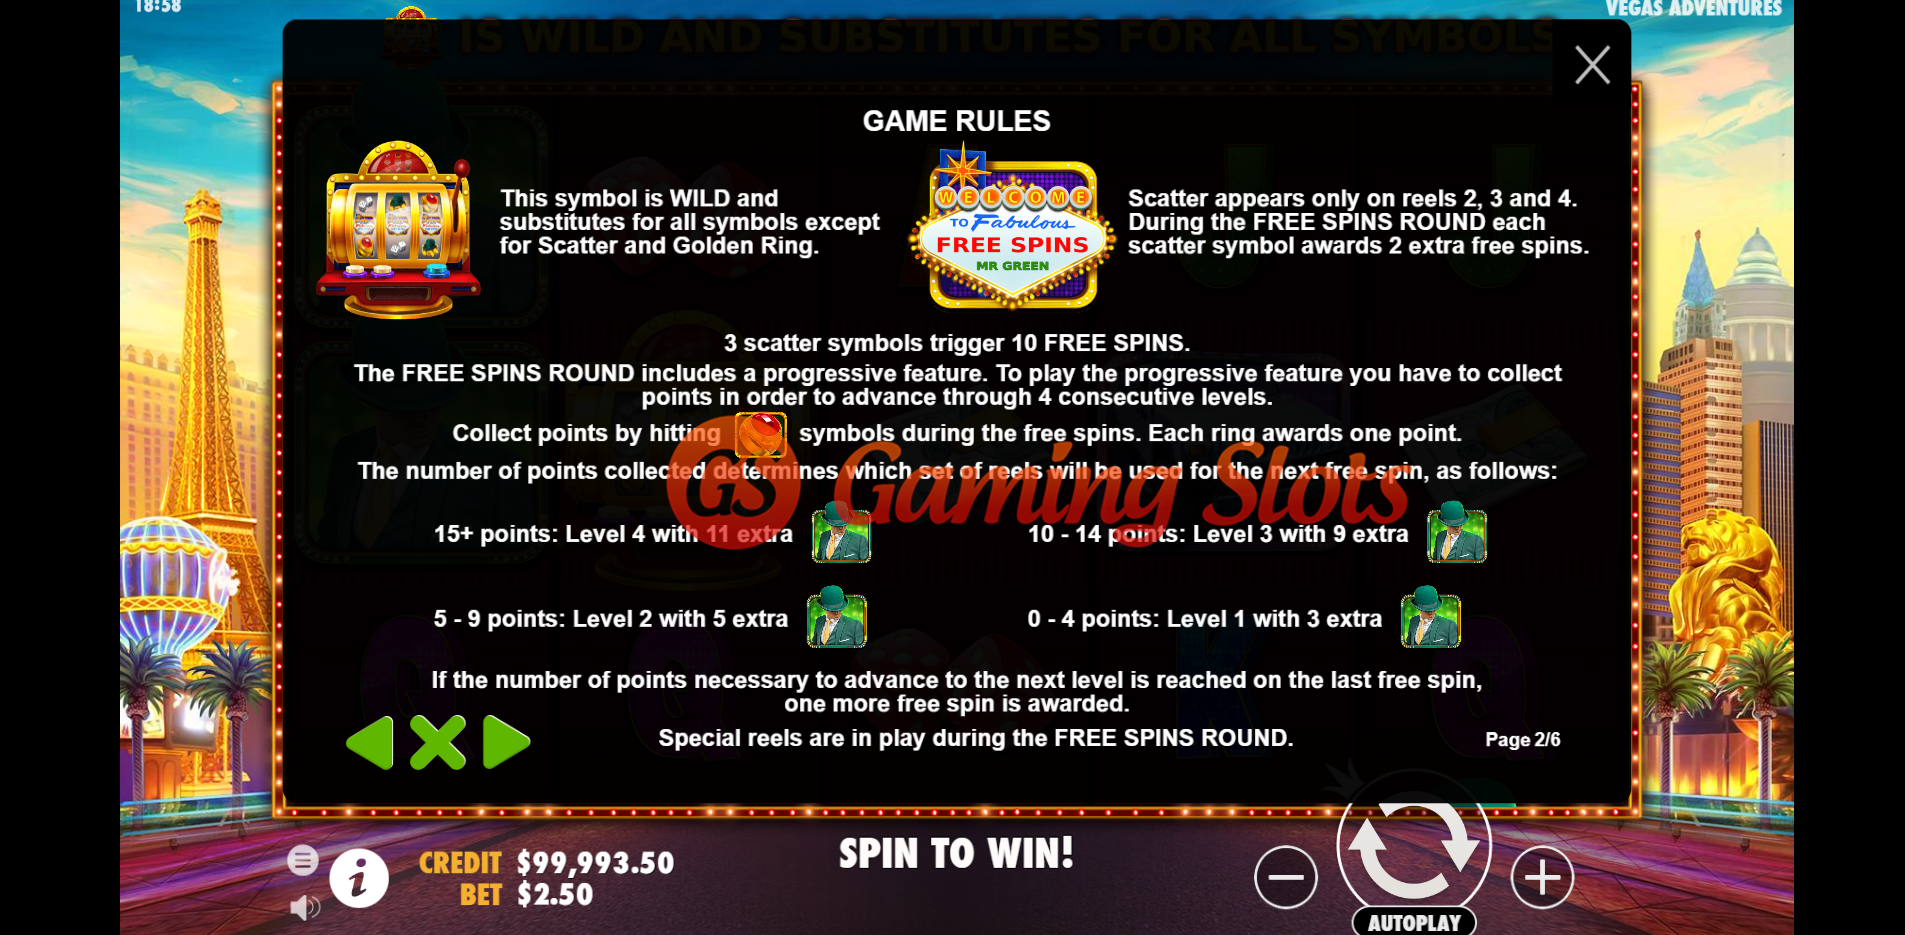 Game Rules for Vegas Adventures slot by Pragmatic Play